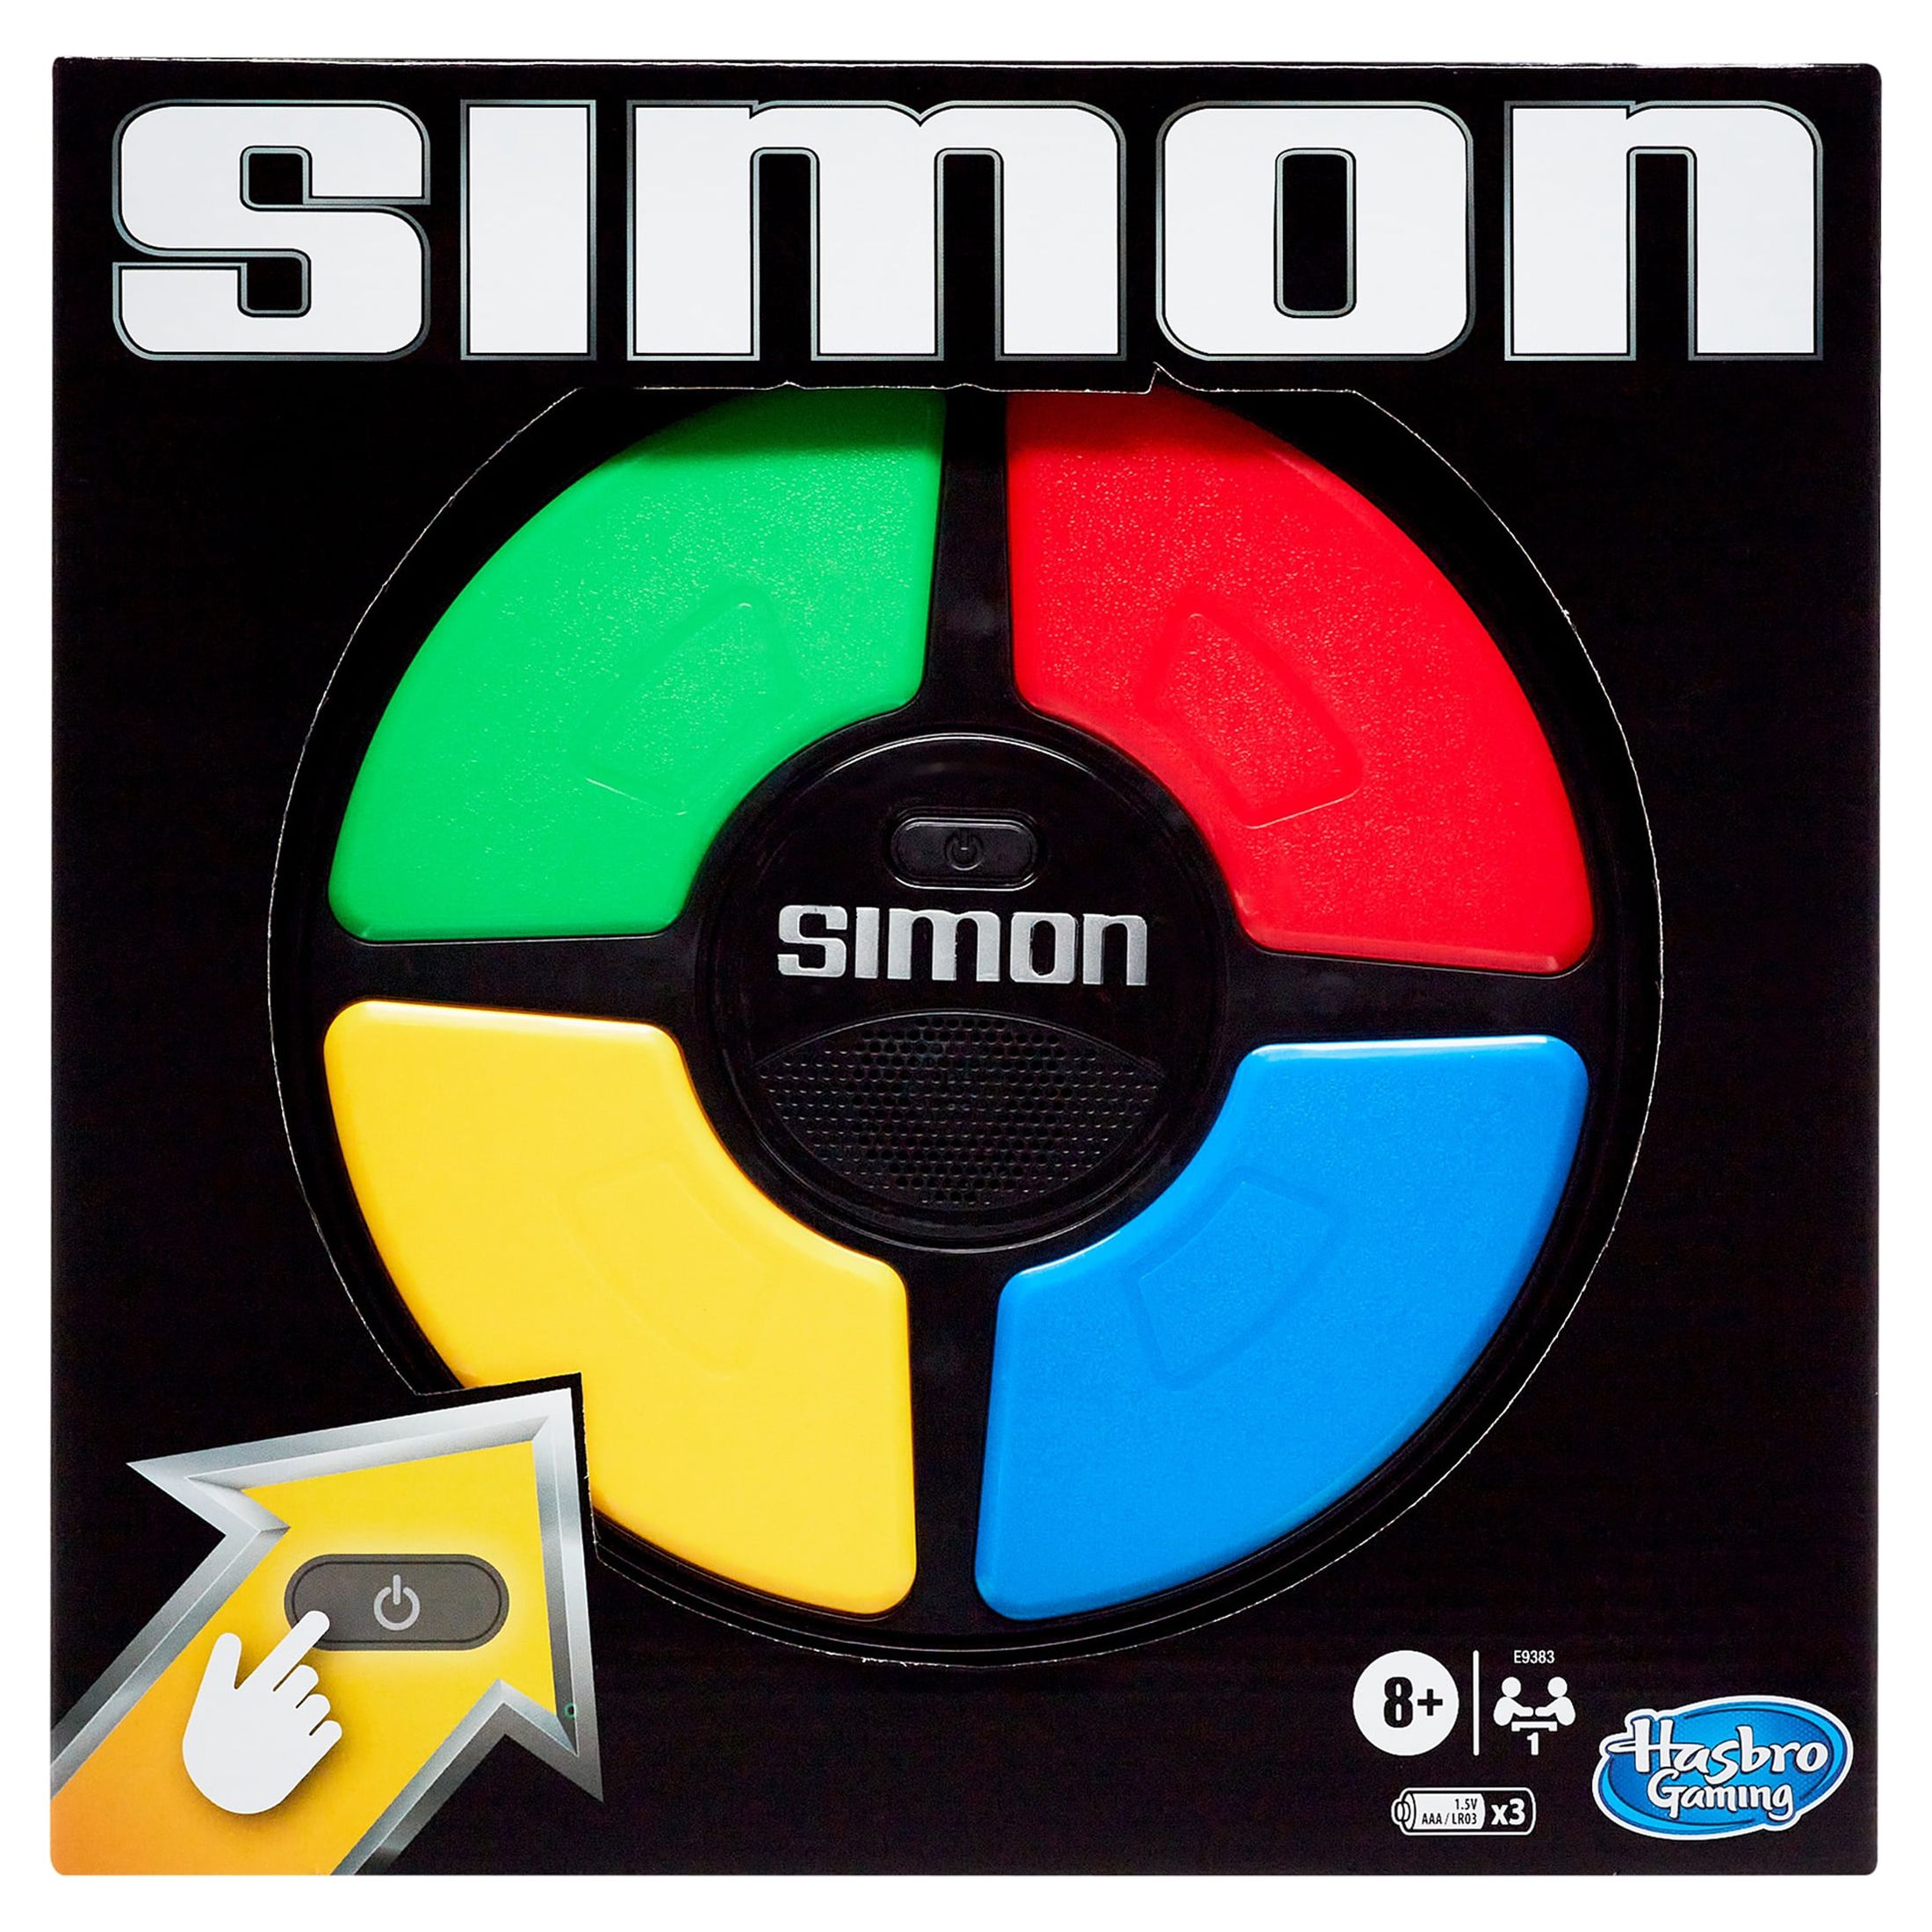 Simon Electronic Memory Board Game for Kids and Family Ages 8 and up, 1 Player - image 1 of 9